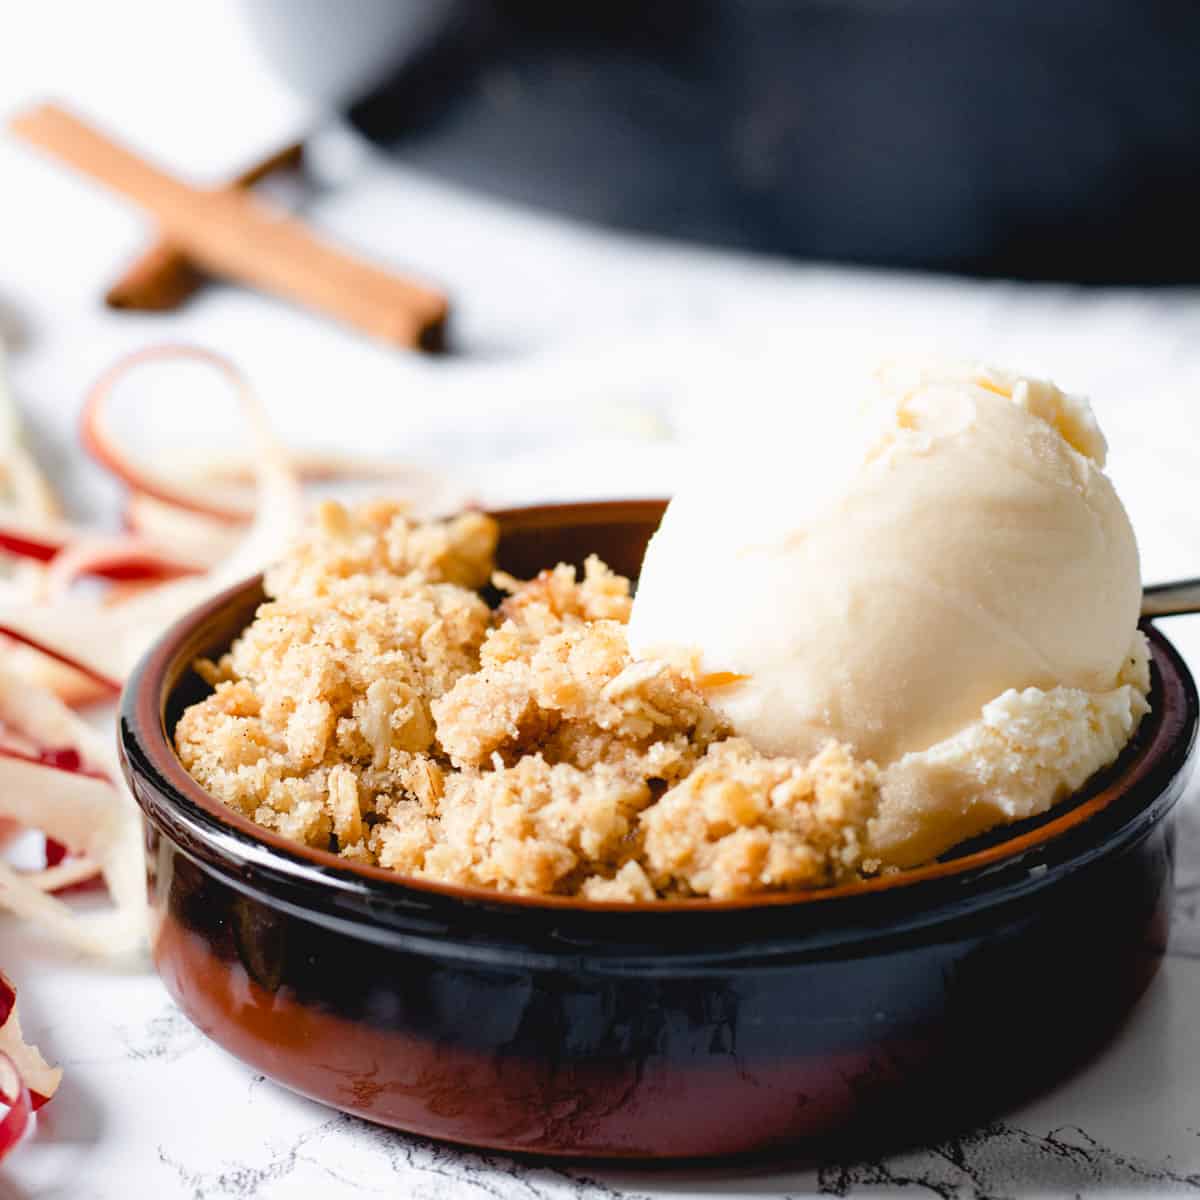 Individual serving of skillet apple crisp with ice cream. Apple peel ribbons and cinnamon sticks on the left.